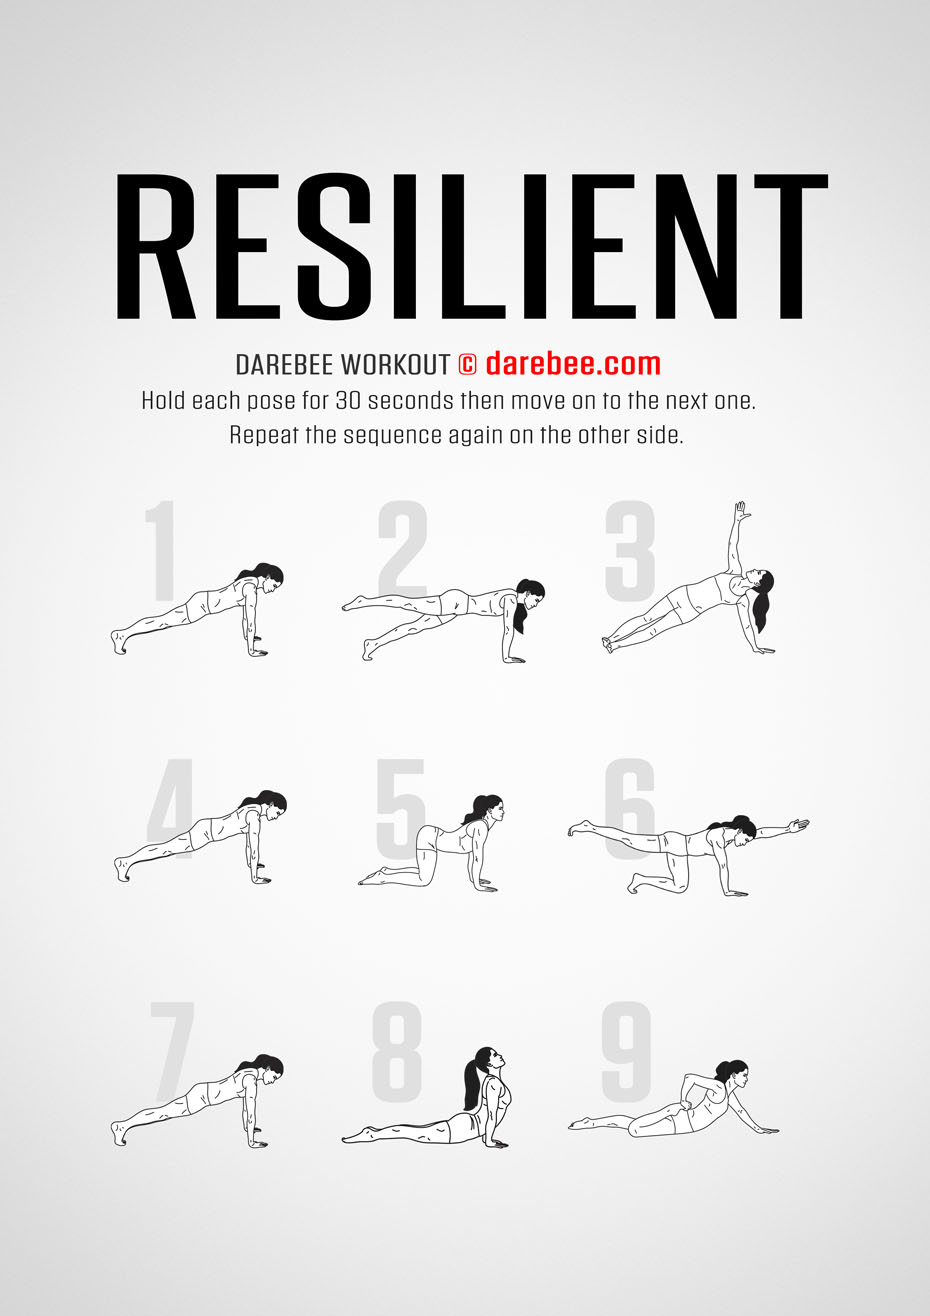 Resilient is a Darebee home fitness workout that helps you become agile, flexible and strong.